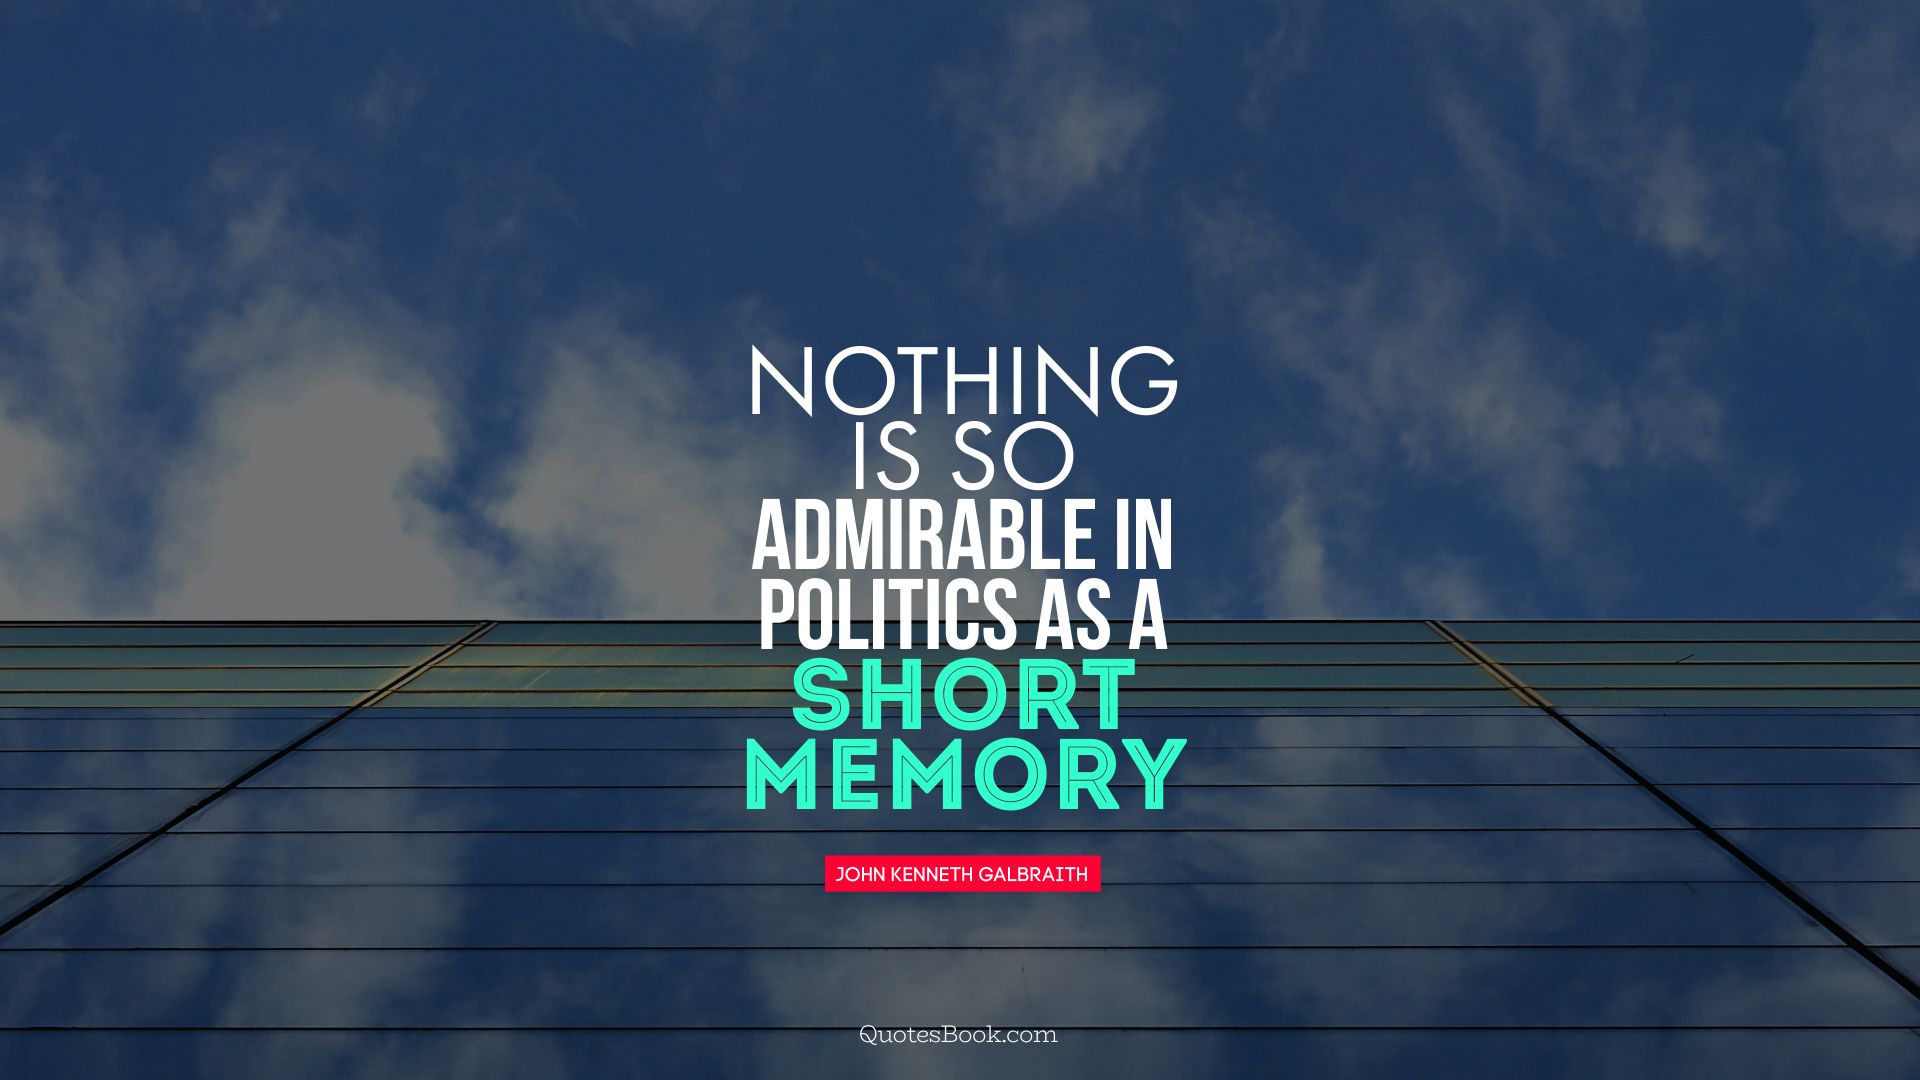 Nothing is so admirable in politics as a short memory. - Quote by John Kenneth Galbraith 